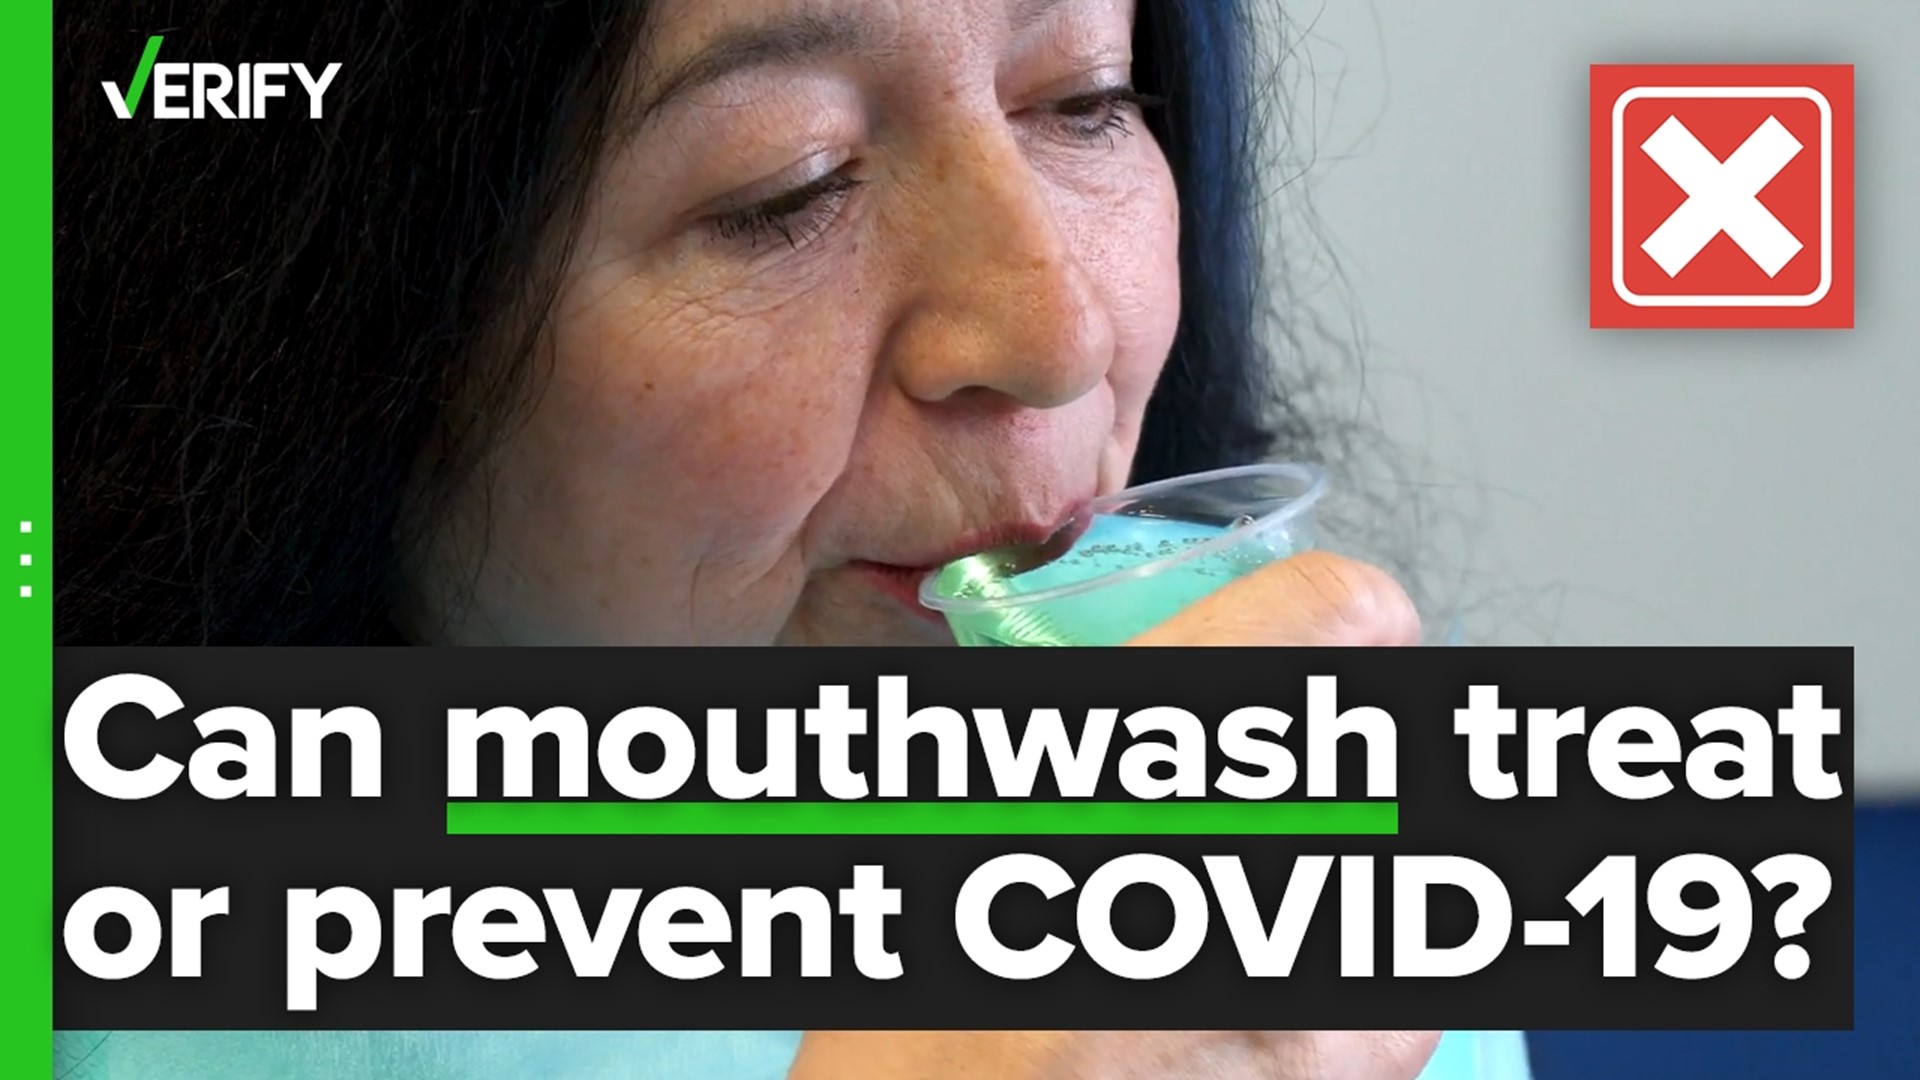 Can gargling mouthwash prevent or treat COVID-19? The VERIFY team confirms this is false.